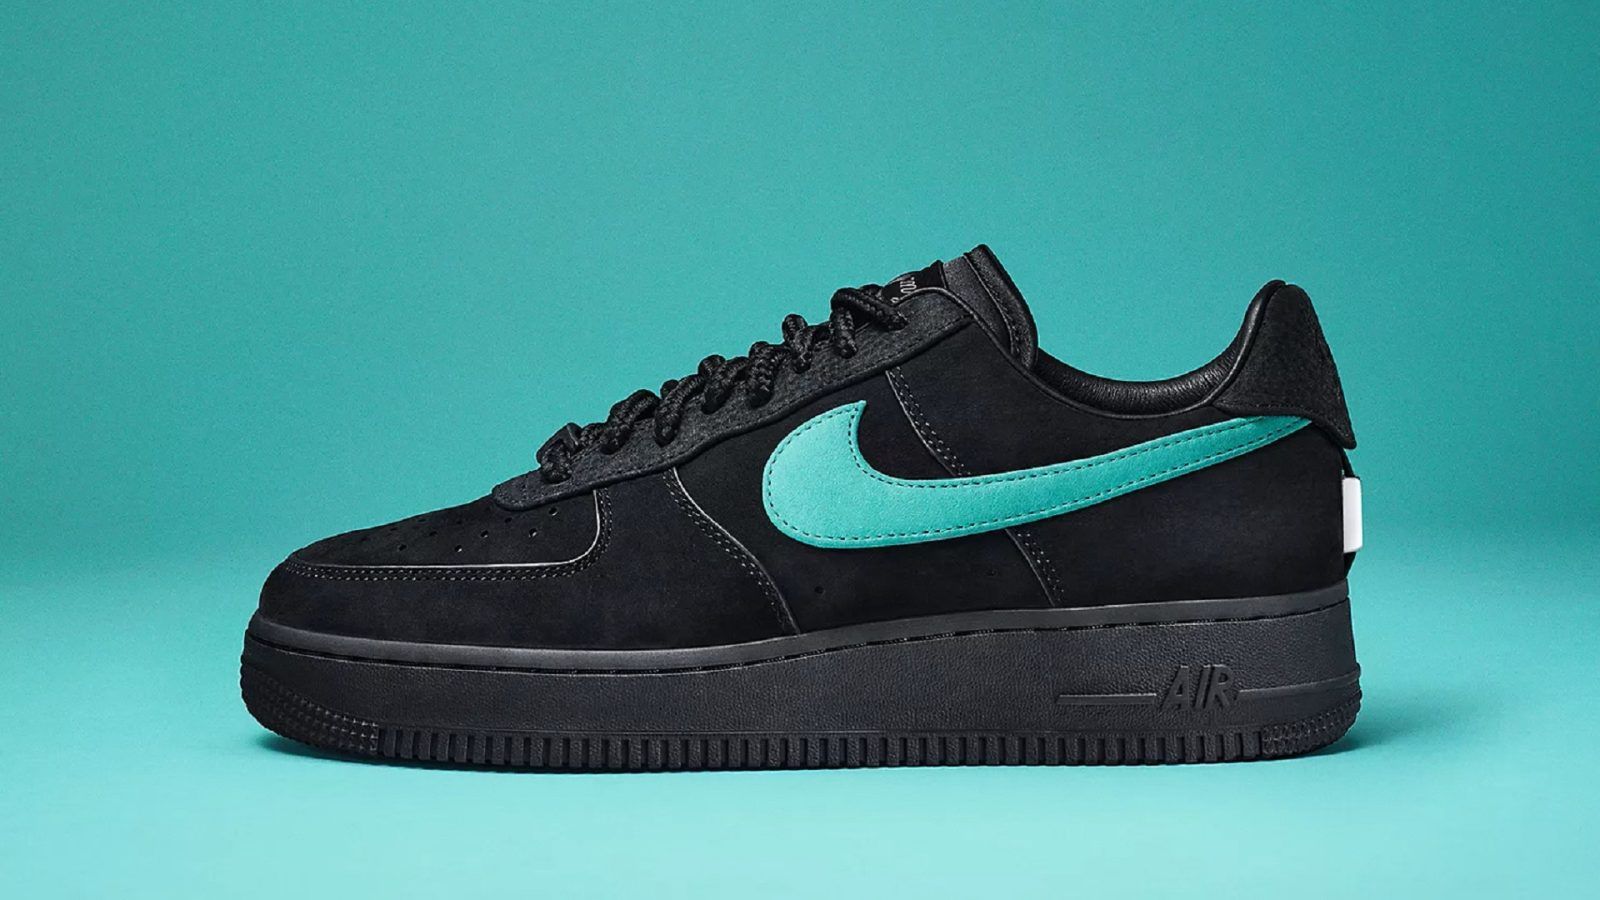 Nike and Tiffany unveil Air Force 1 sneakers